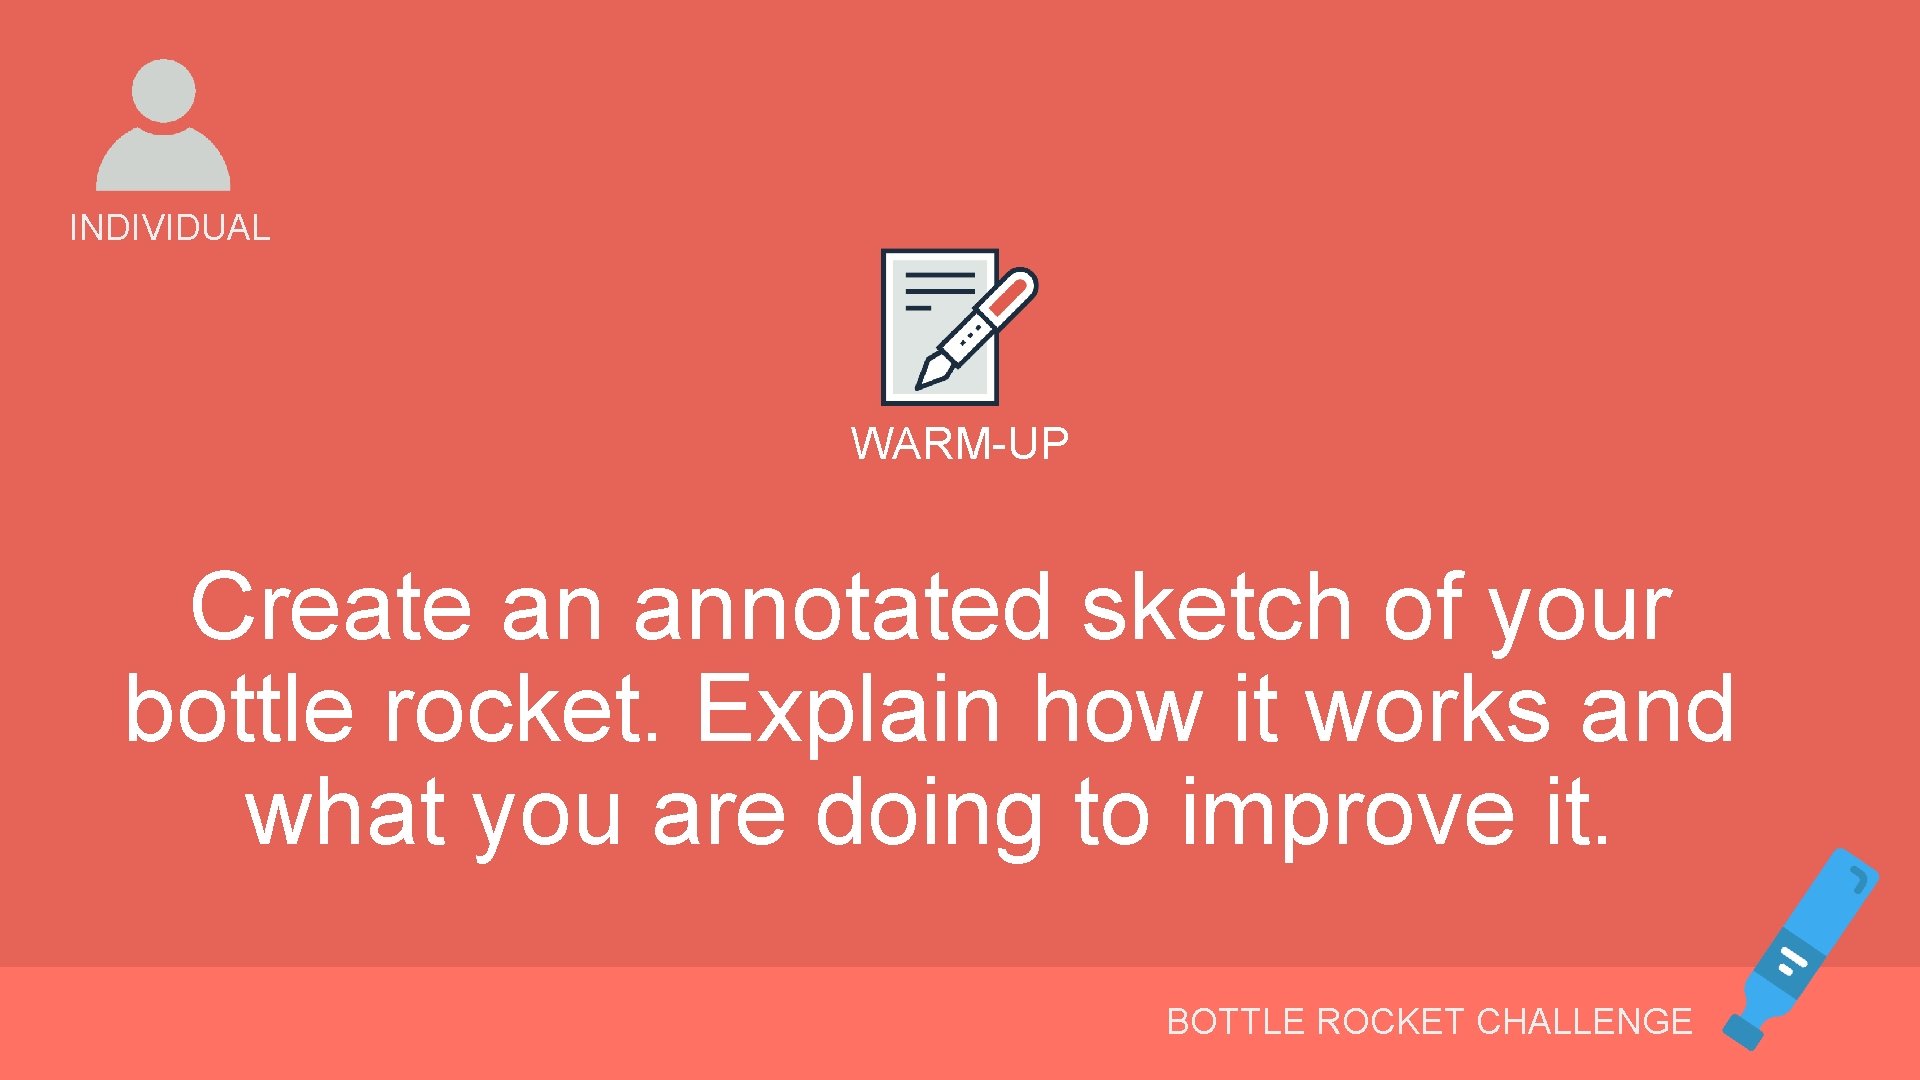 INDIVIDUAL WARM-UP Create an annotated sketch of your bottle rocket. Explain how it works